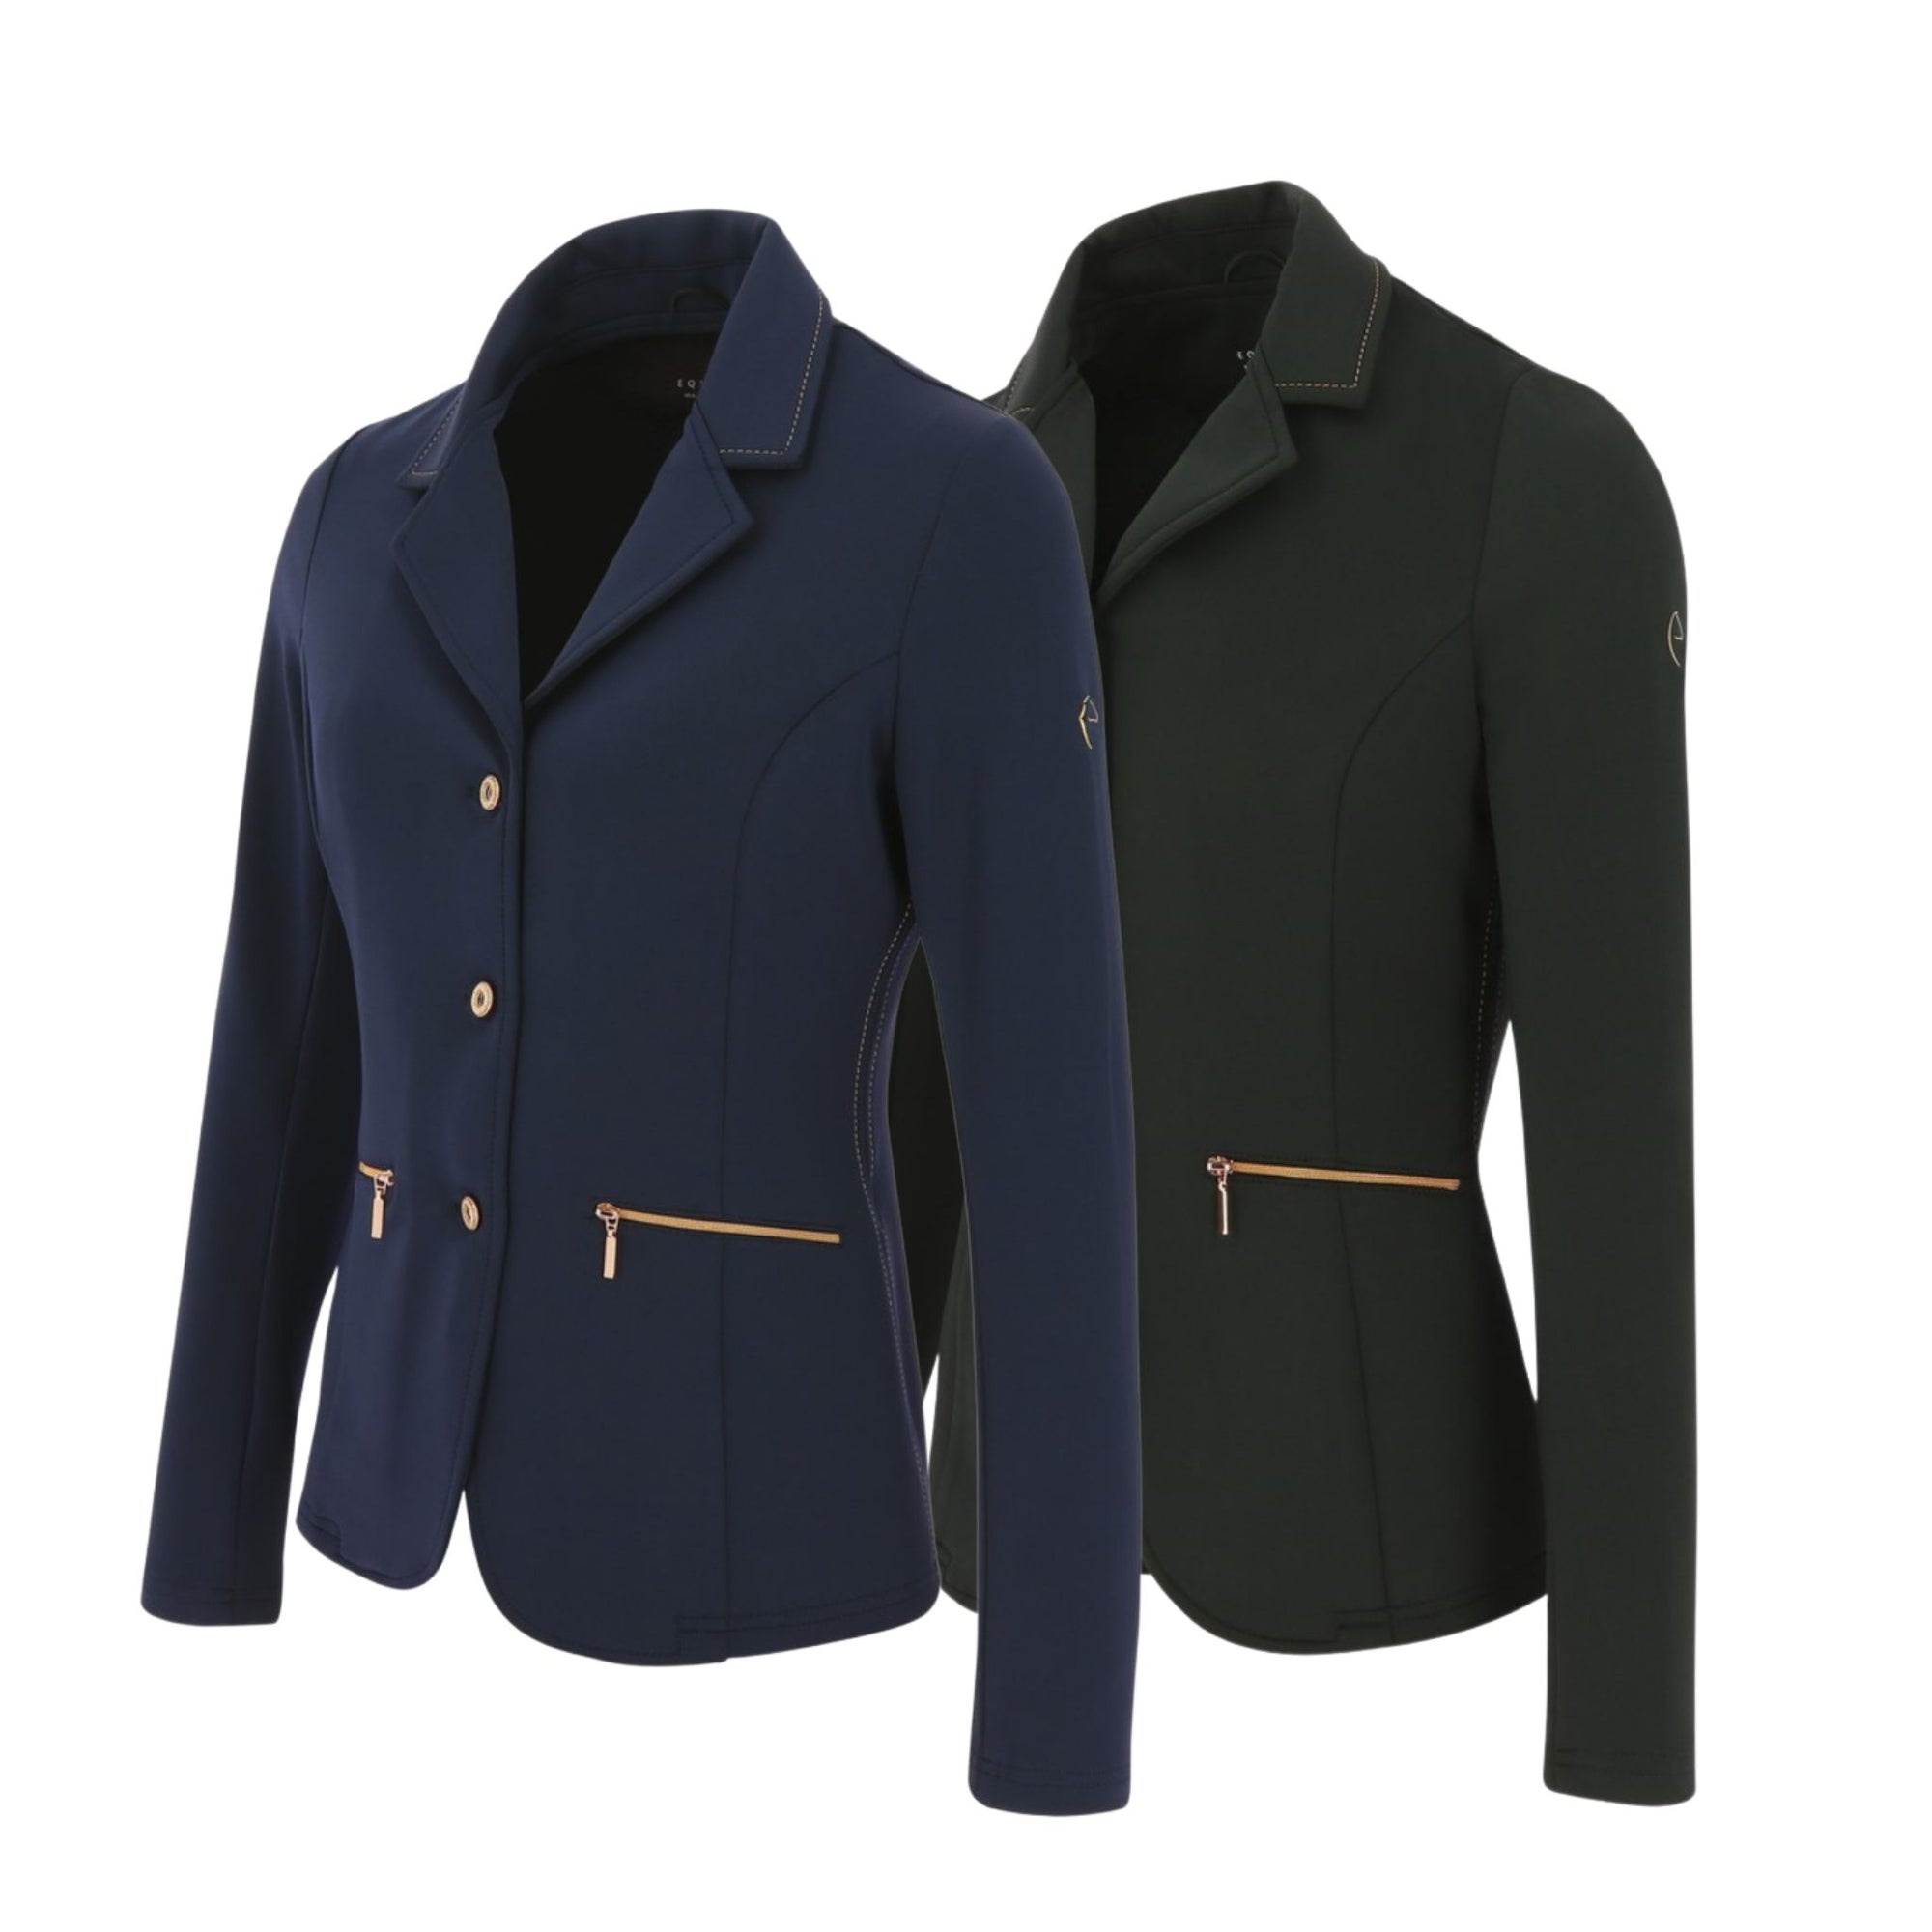 Both Navy and Black show jackets with rose gold stitching, zippers and sparkly buttons